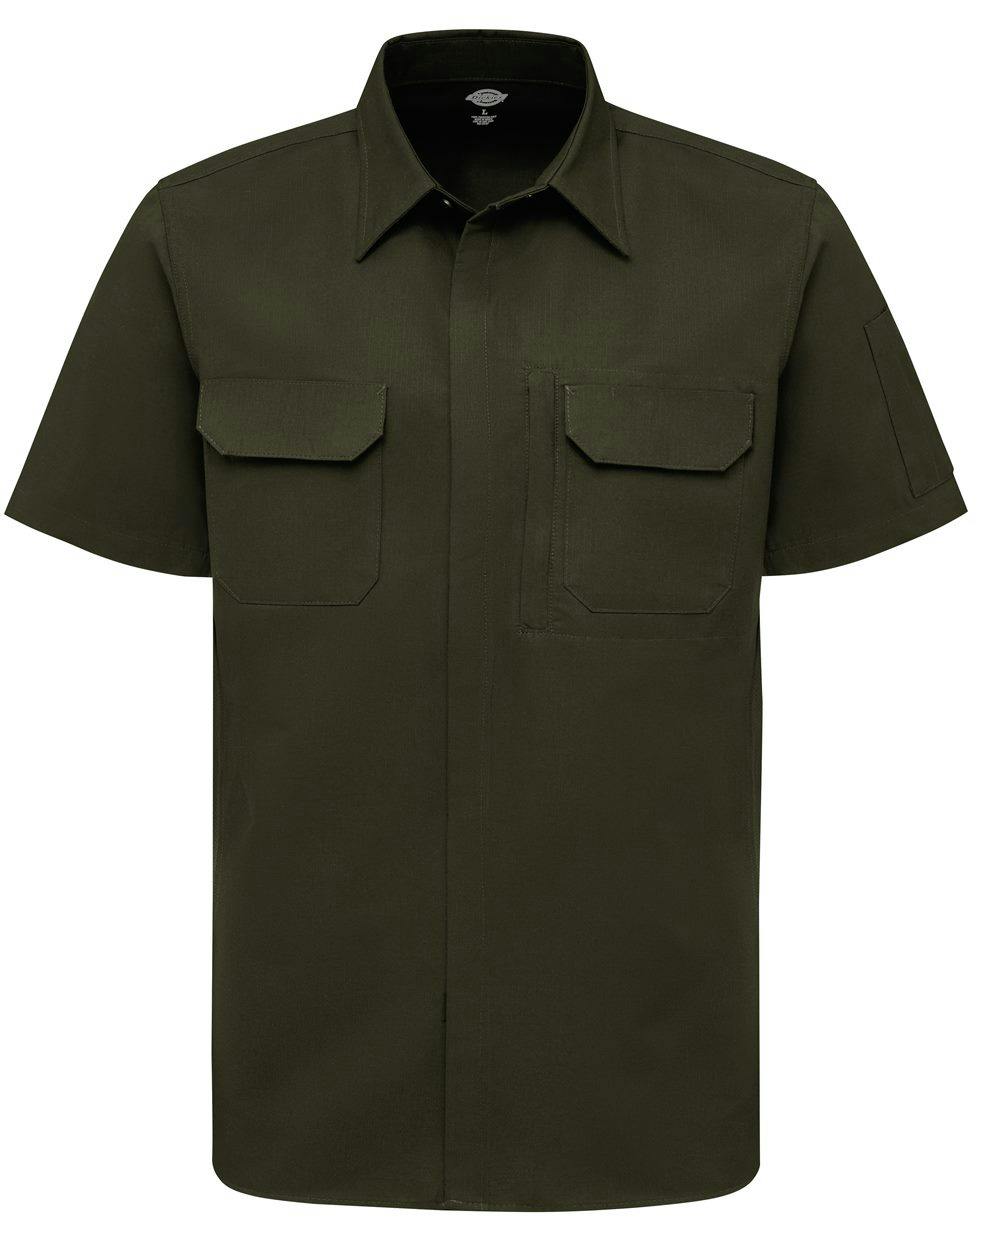 Image for Tactical Shirt - LS94